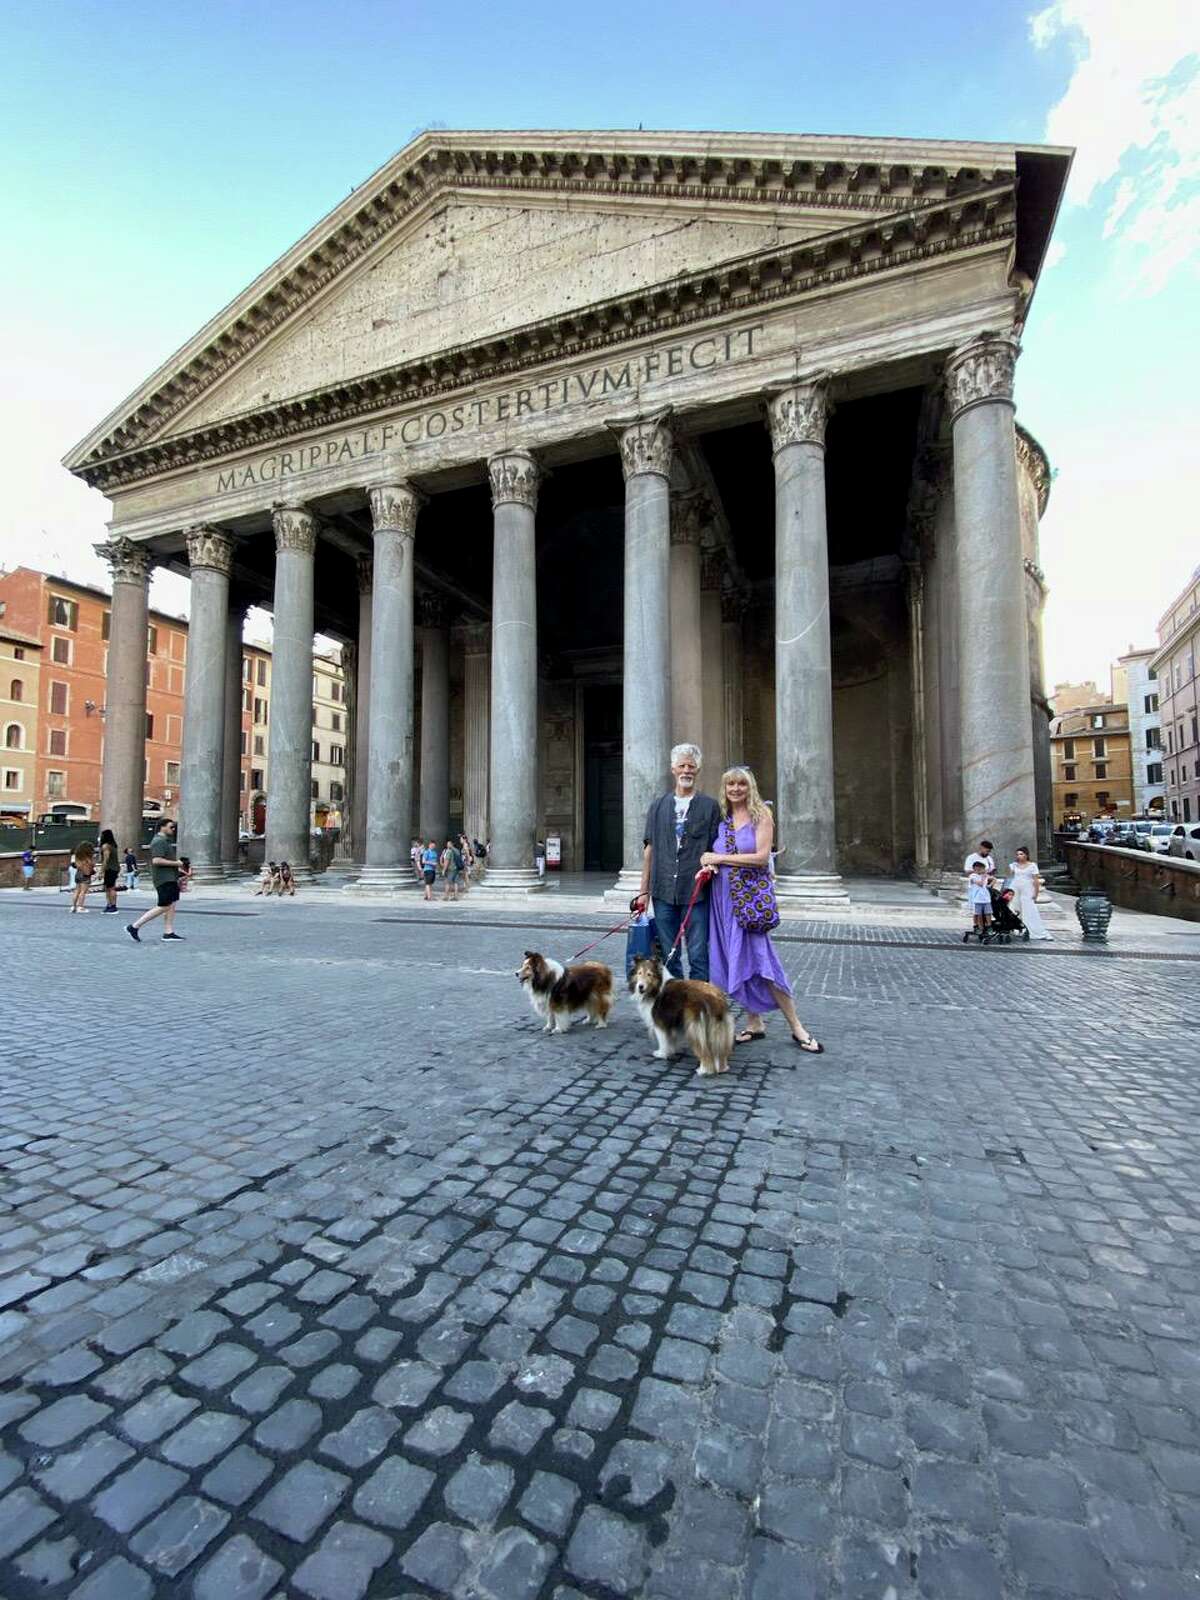 Connecticut Academy for the Arts in Torrington has received a grant to provide Italian studies to local students. The directors, John and Teresa Sullivan, traveled to Italy recently to visit the Centro Linguistico Italiano Dante Alighieri, in Rome. They are pictured with their dogs at the Pantheon.